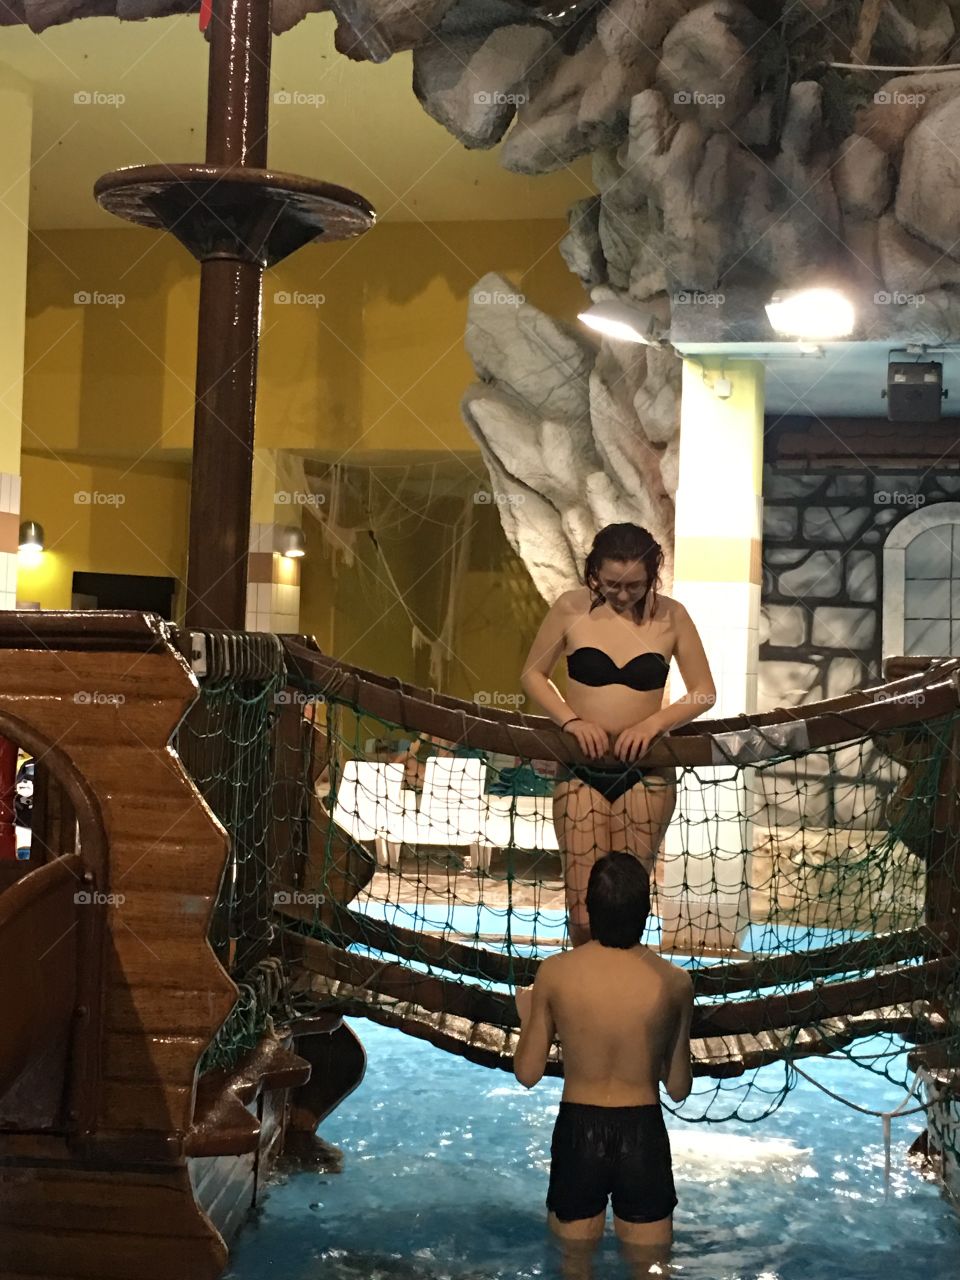 Couple at indoor swimming pool